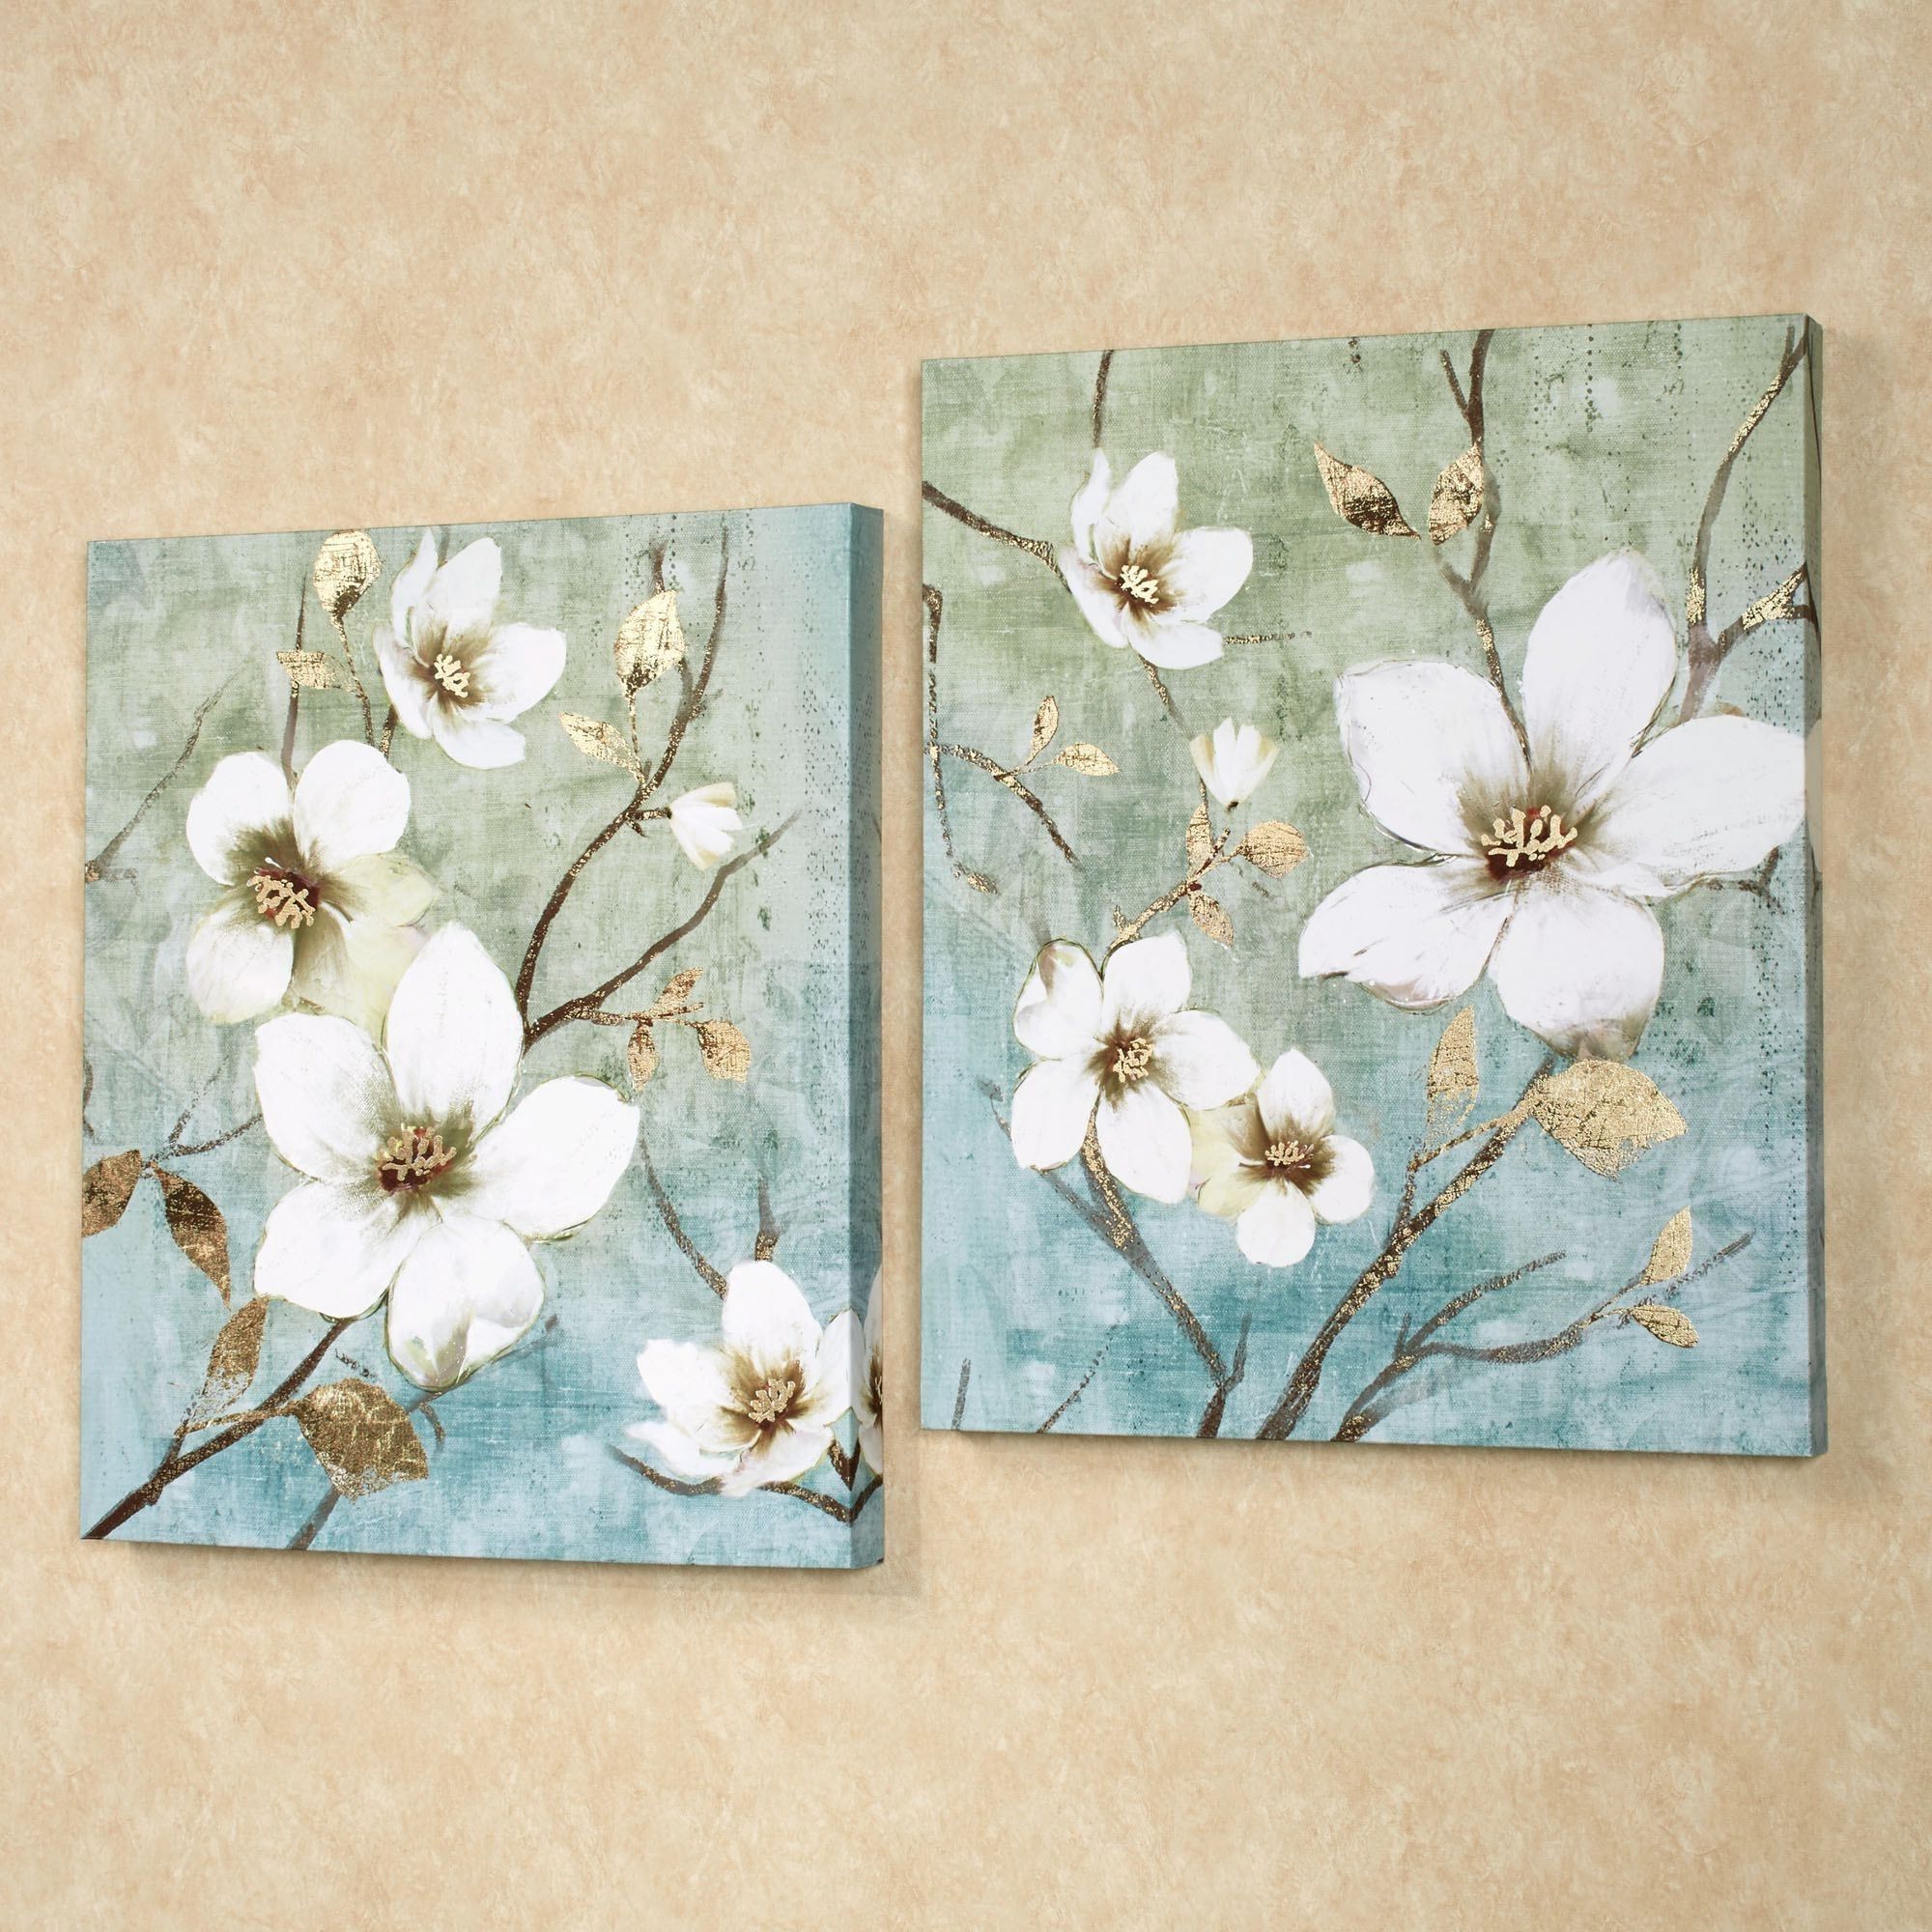 2017 Floral Wall Art Canvas Regarding In Bloom Floral Canvas Wall Art Set (View 1 of 15)